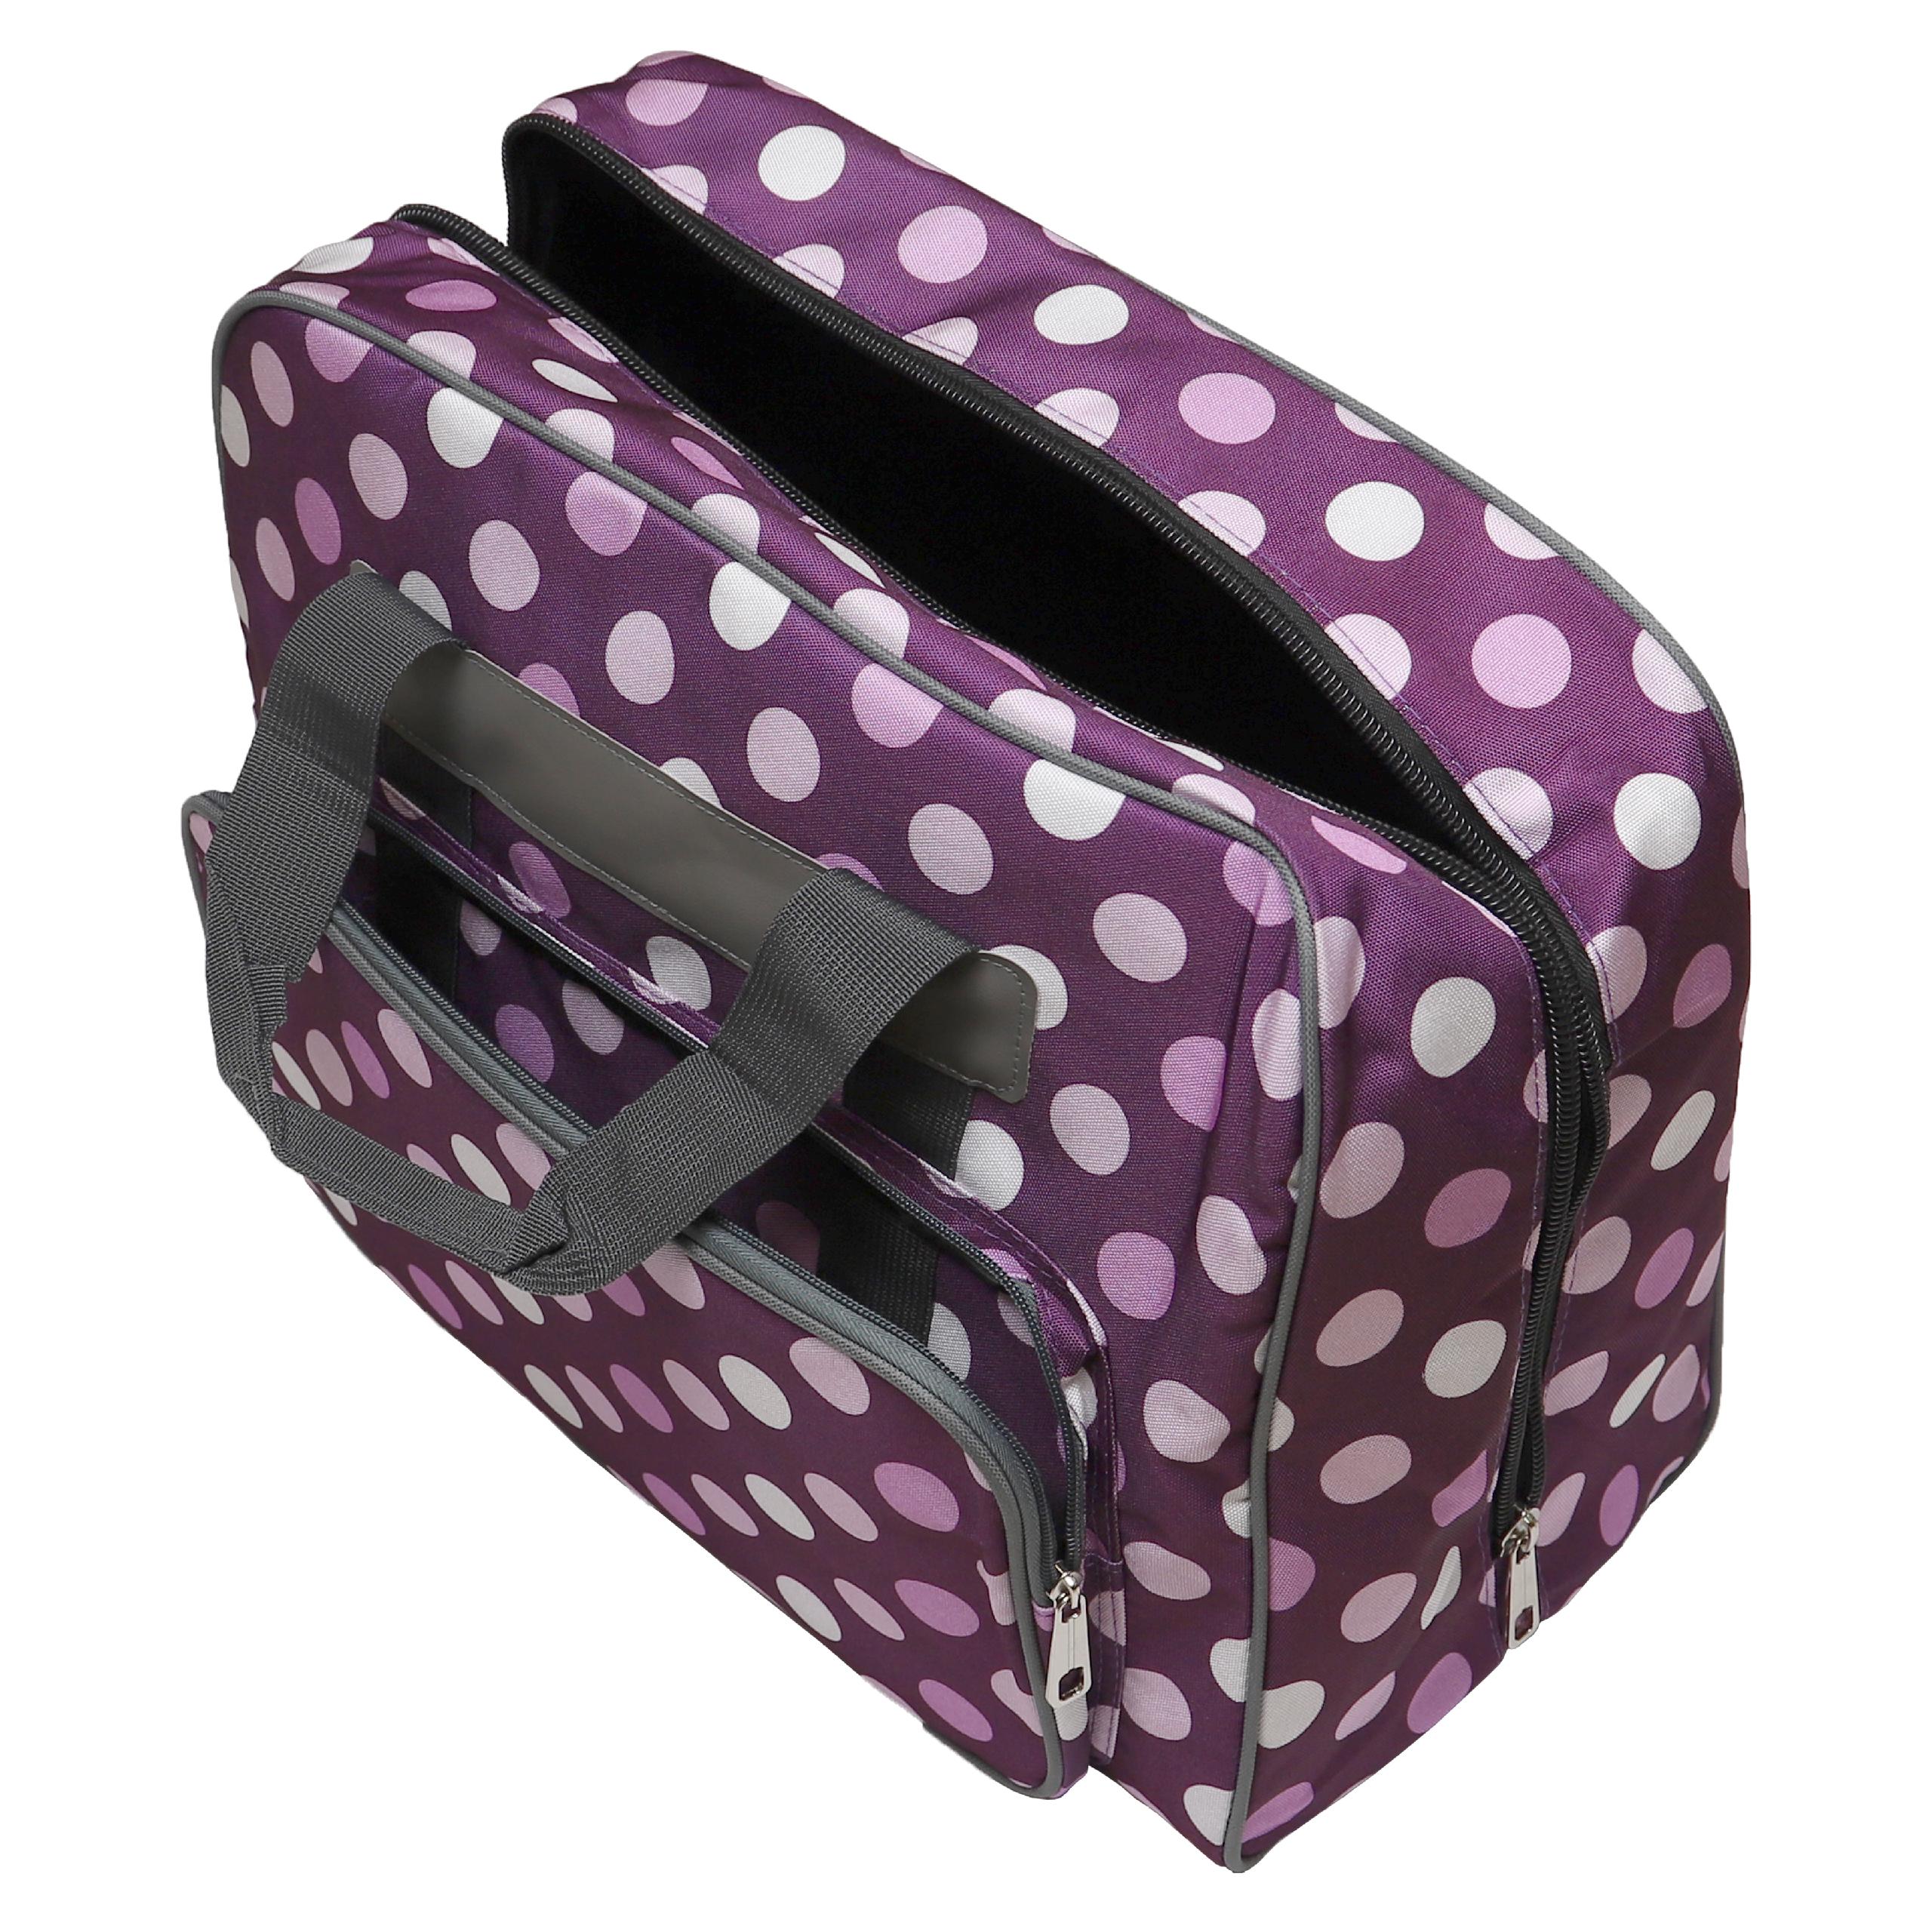 vhbw Carrying Bag Sewing Machines - Transport and Storage Case, 48 x 24 x 31.8 cm Purple with Spots